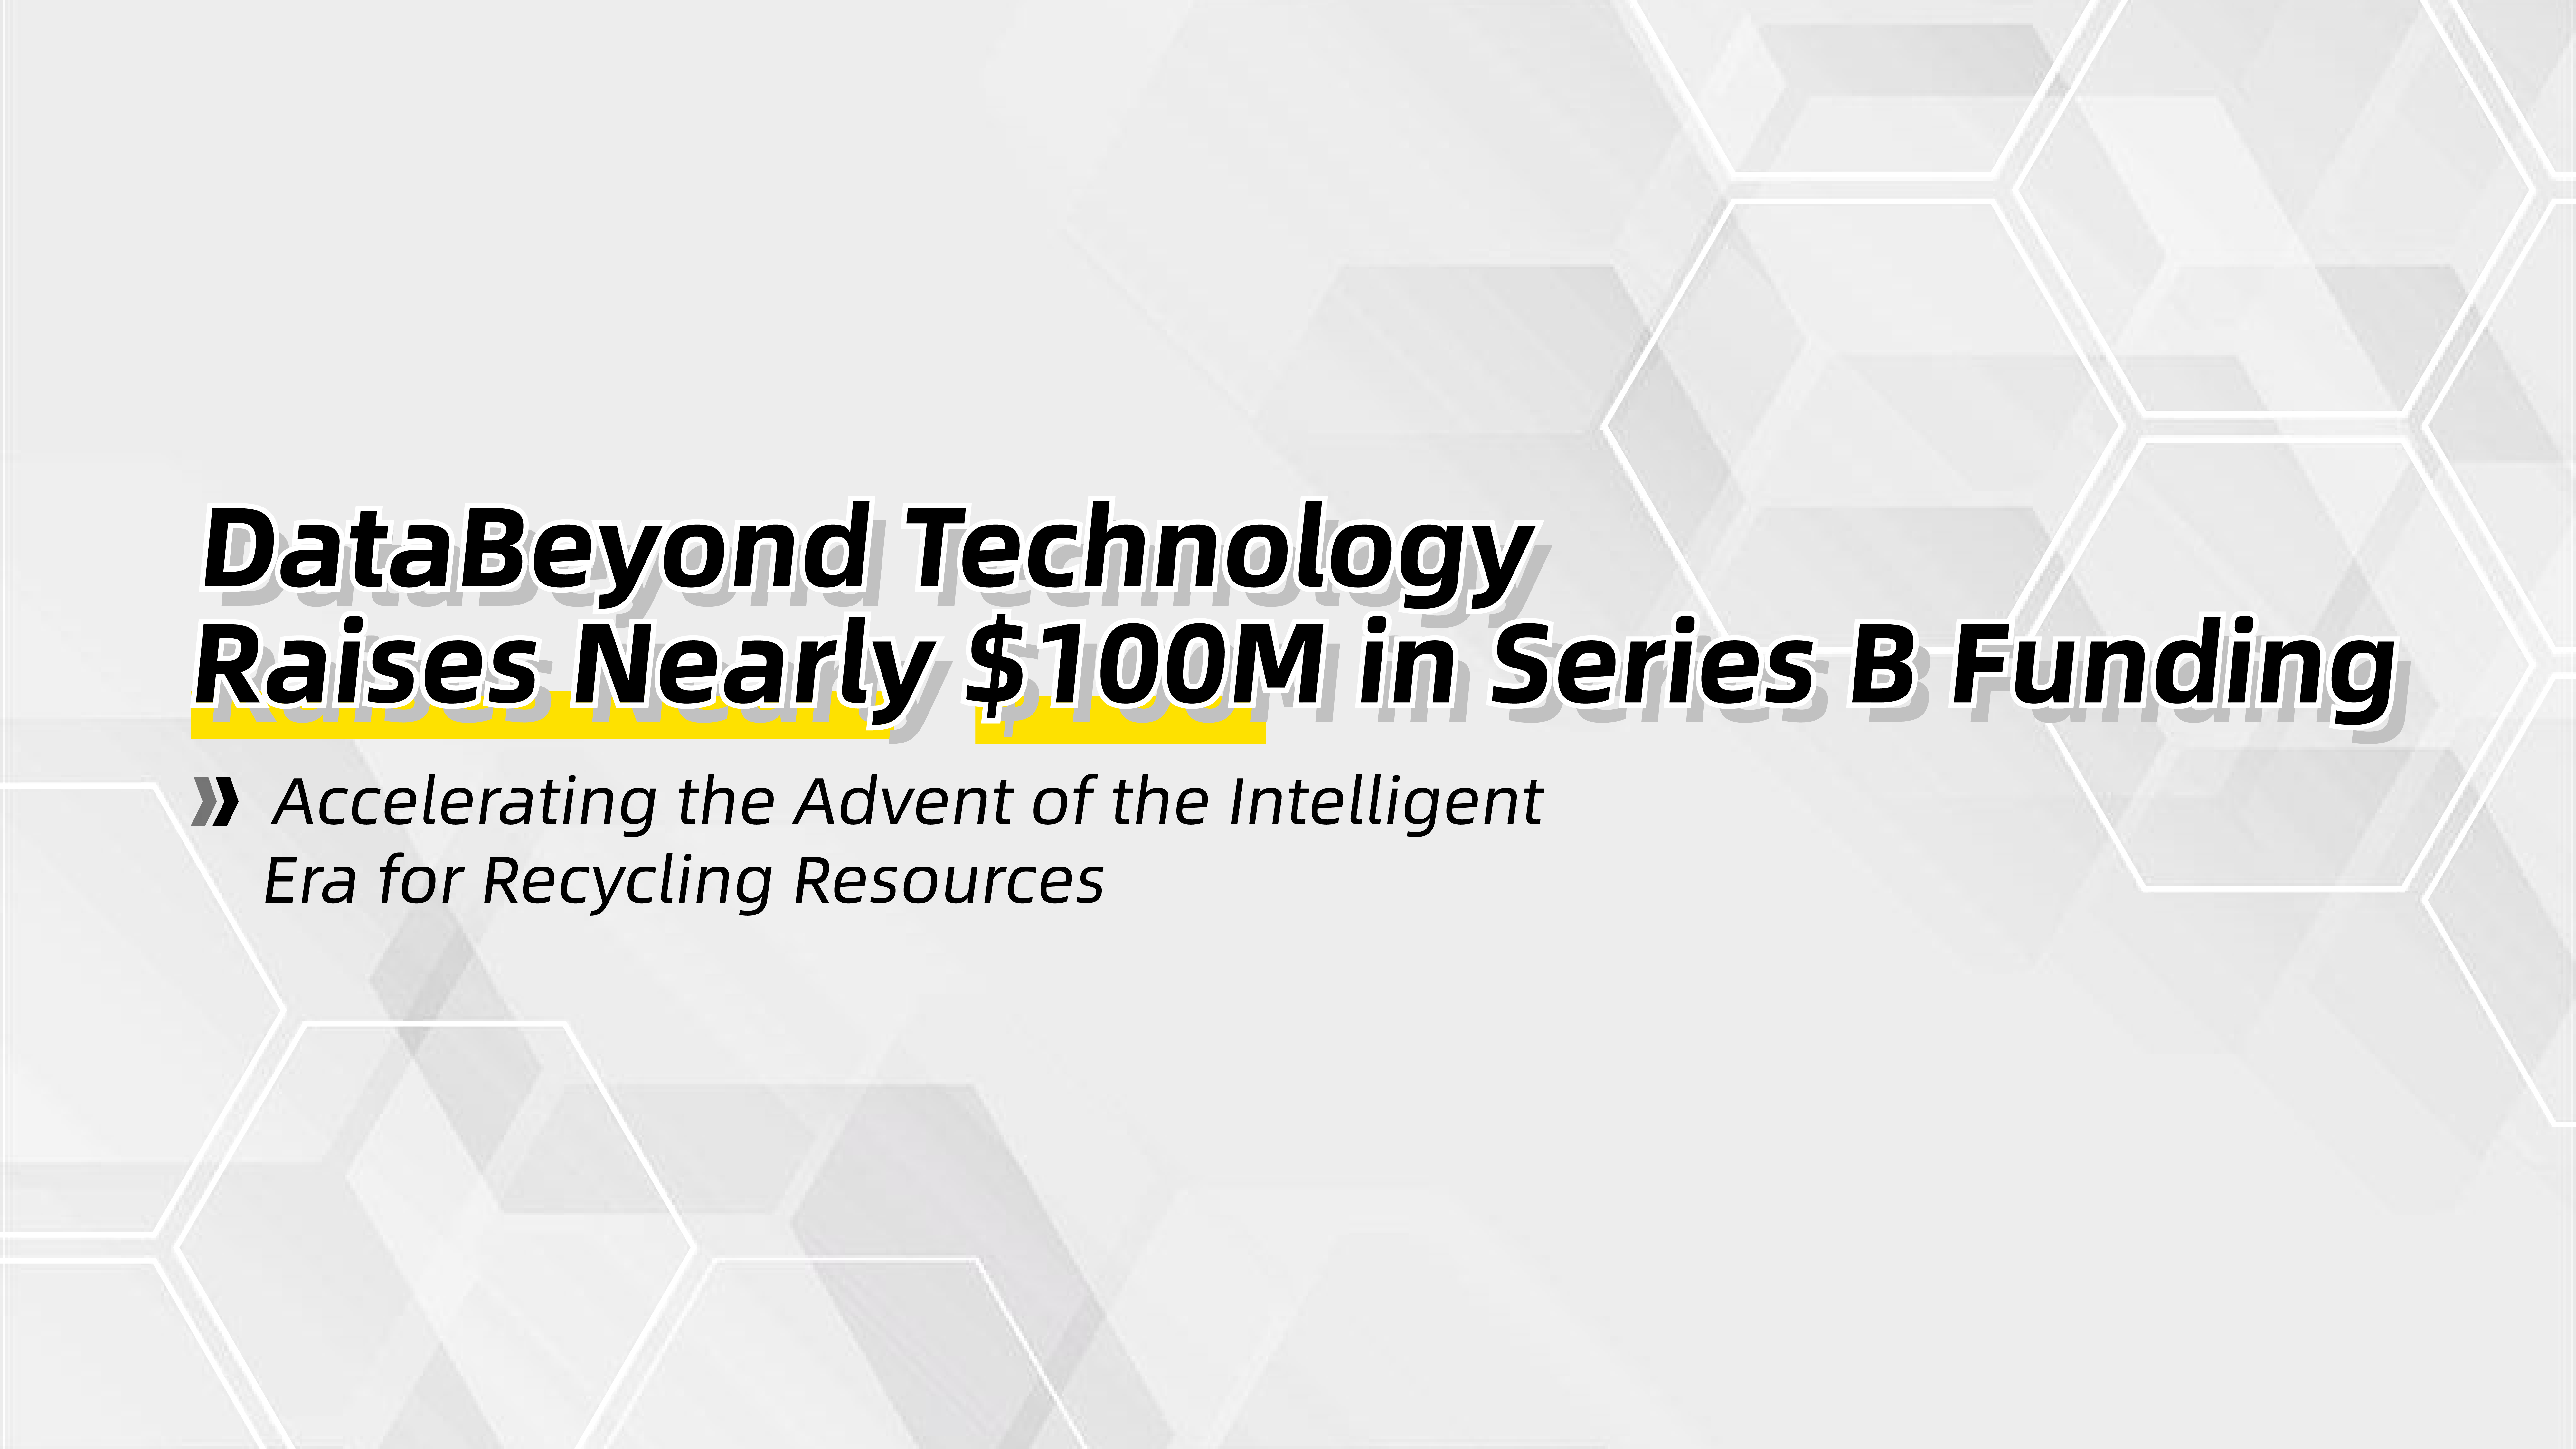 DataBeyond Technology Raises Nearly $100M in Series B Funding，Accelerating the Advent of the Intelligent Era for Recycling Resources